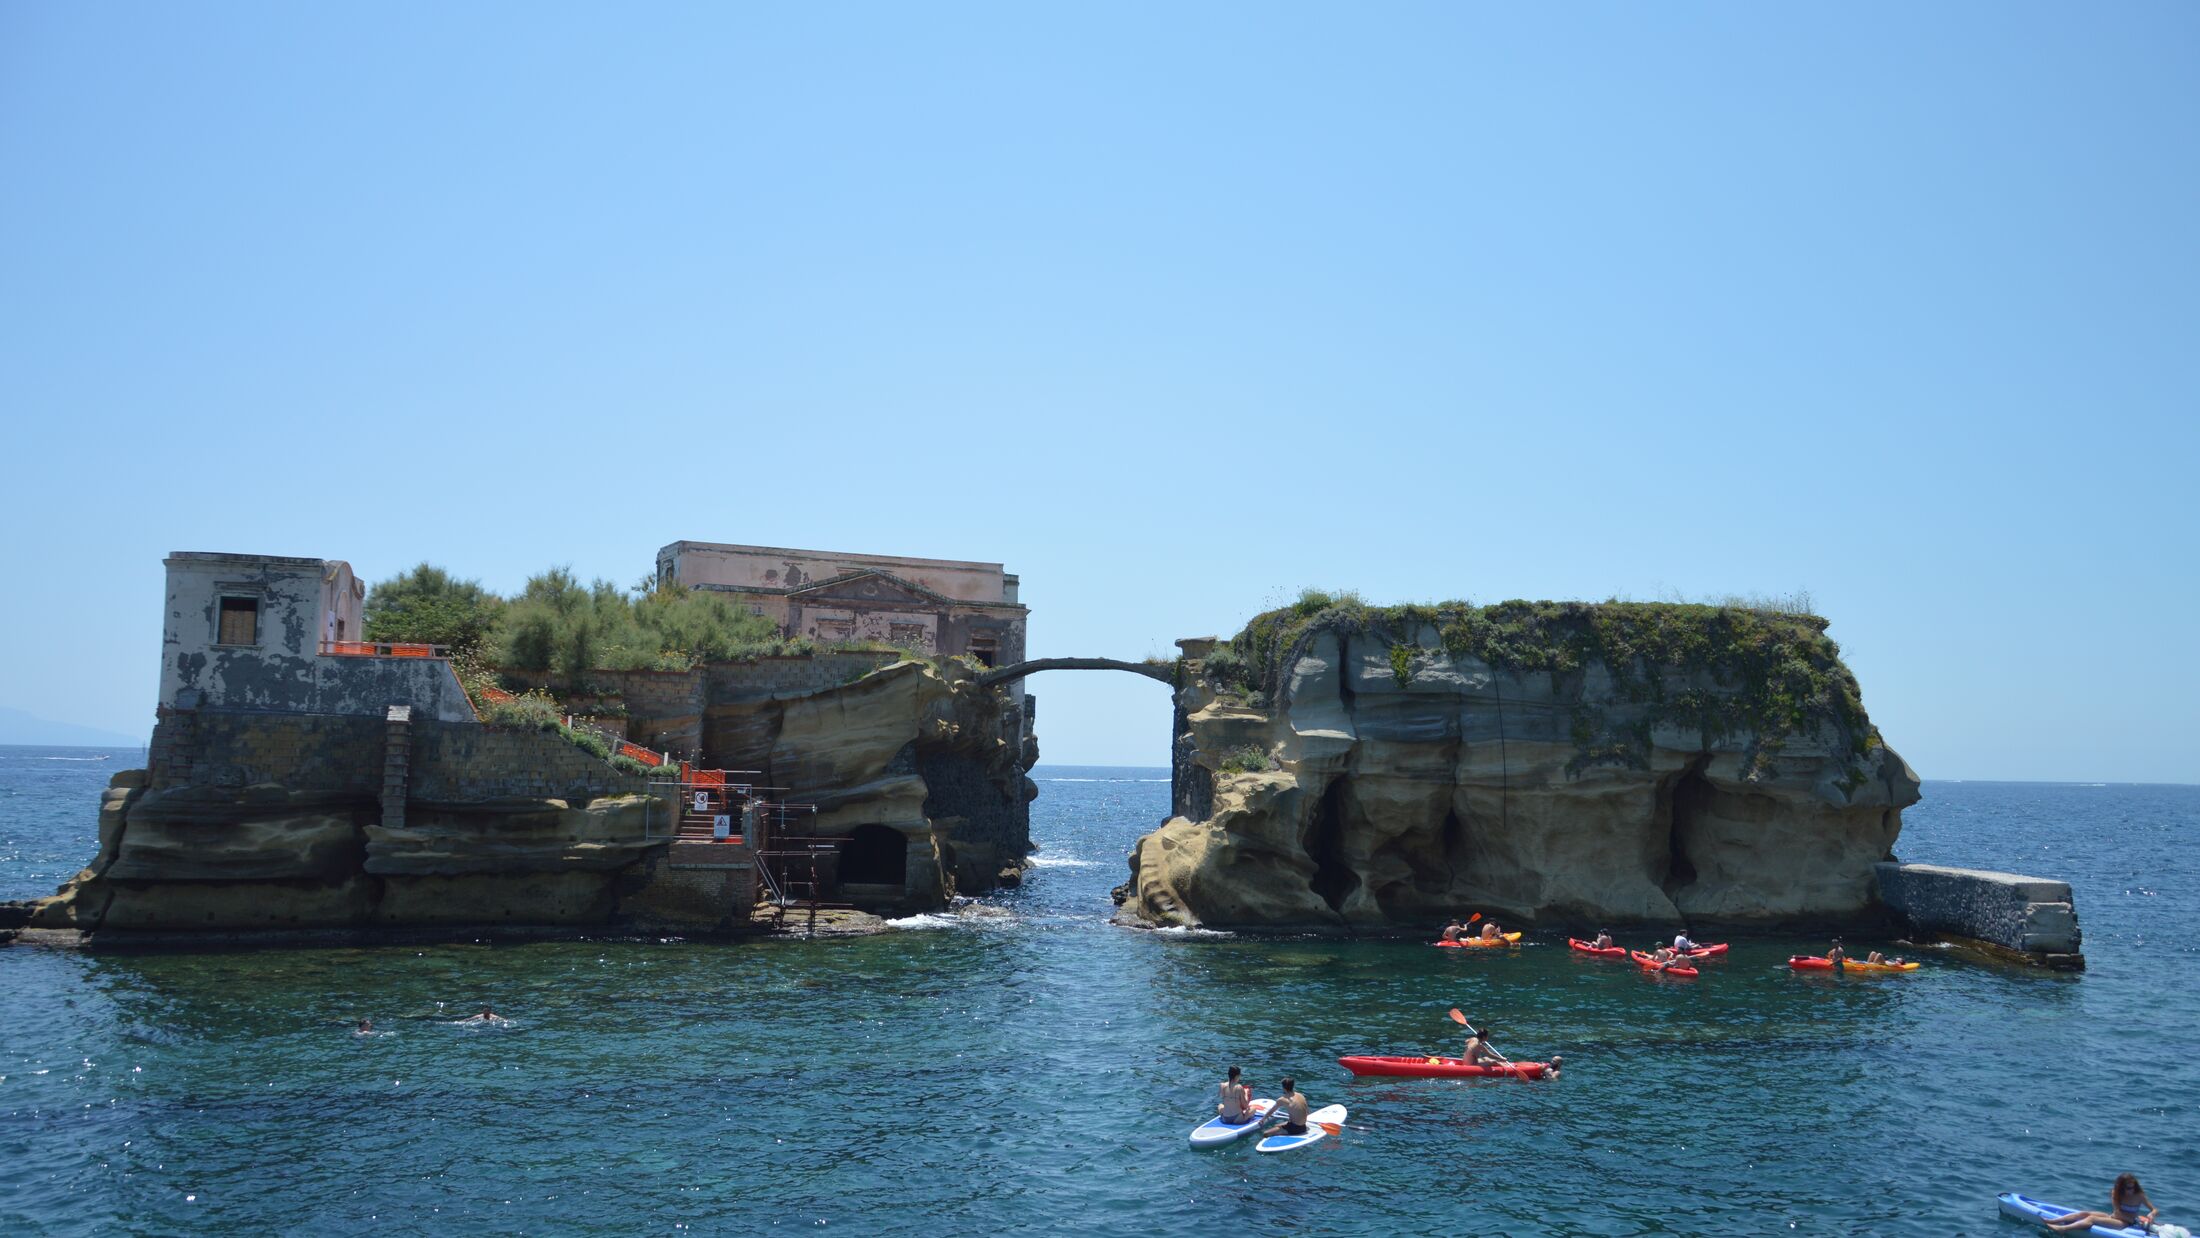 Sunbathers relax by the Gaiola Island, The Underwater Park of Gaiola, a protected marine area.Posillipo.Naples.Italy.